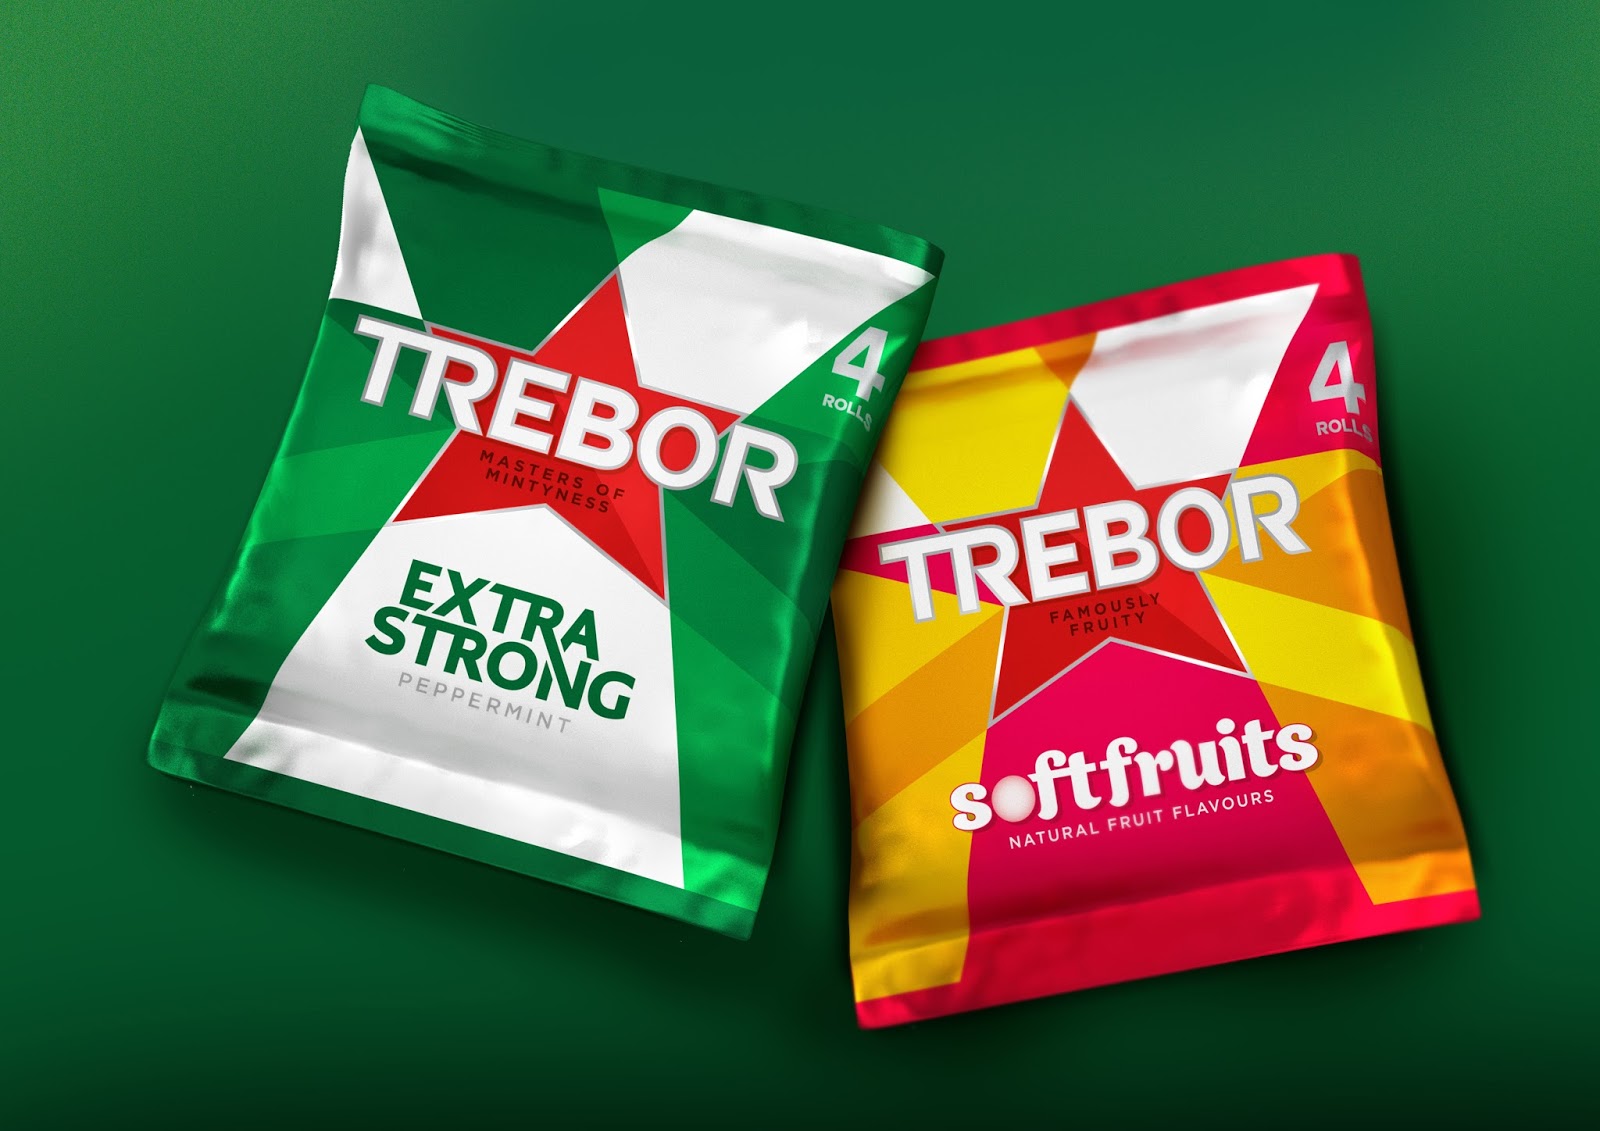 World package. Packaging of the World. Trebor. Mint brand. Trebor Extra strong.